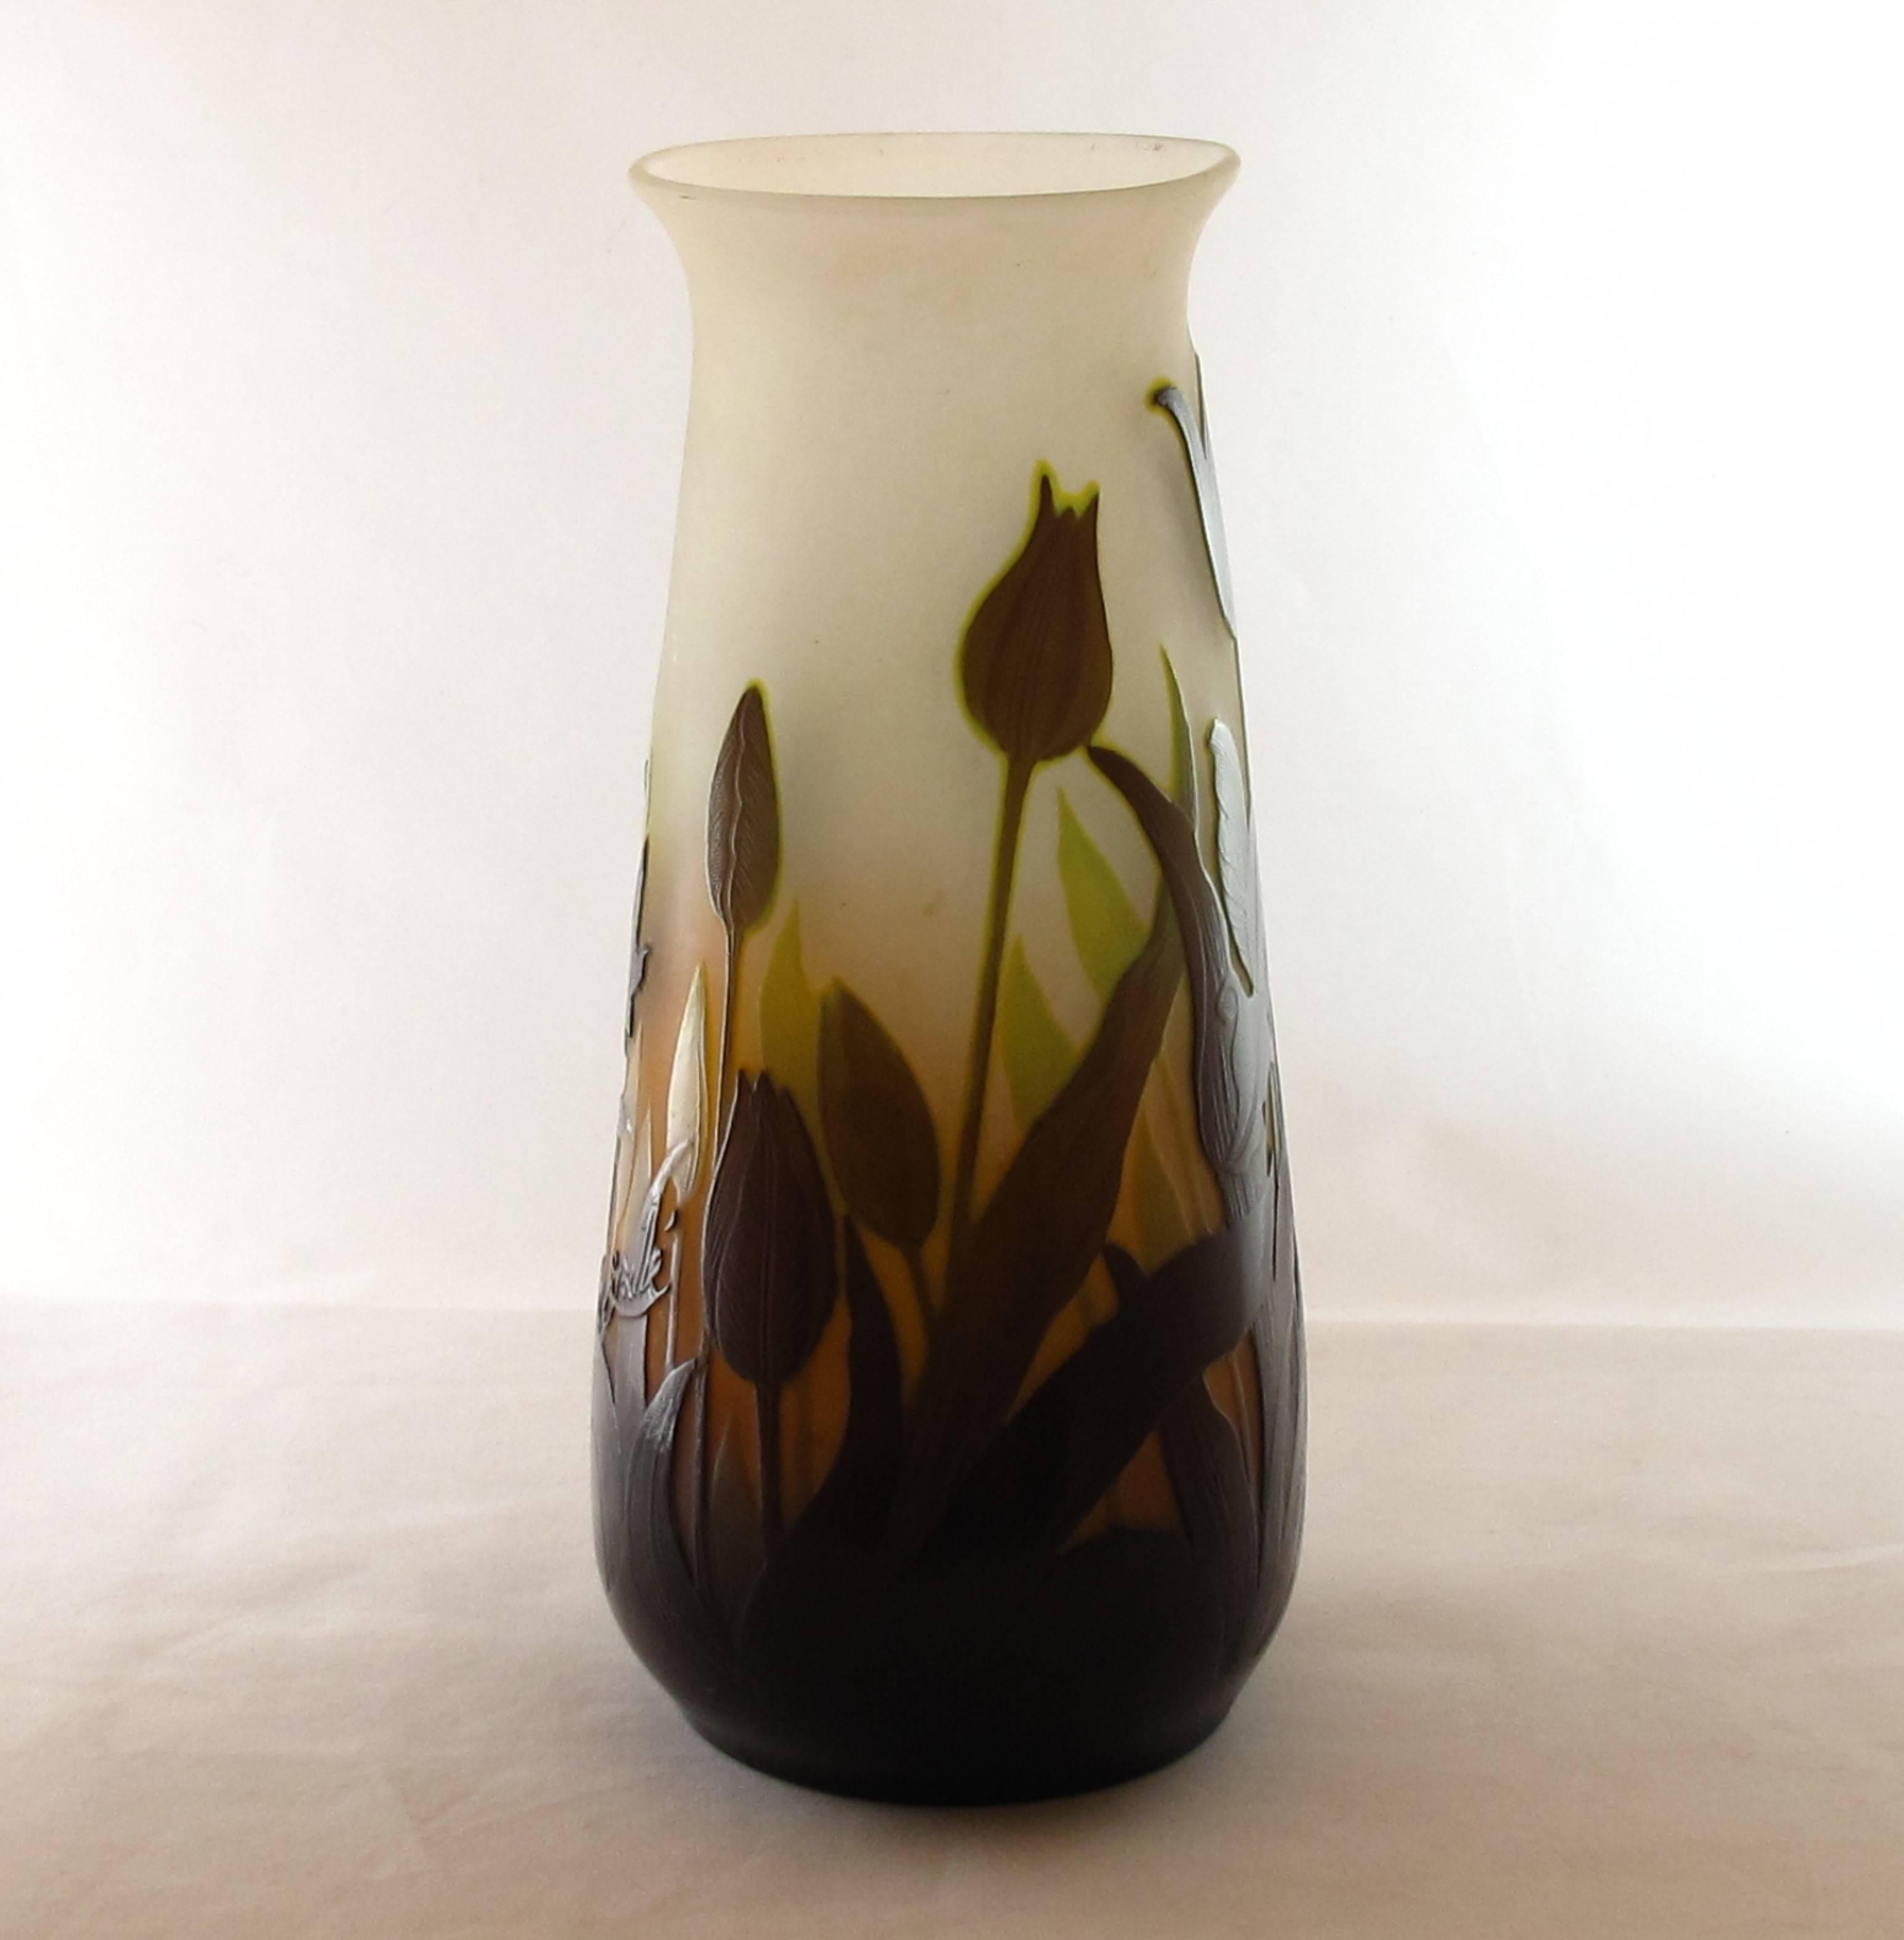 French Emile Galle Cameo Glass Vase Acid Etched with Flowers and Leaves